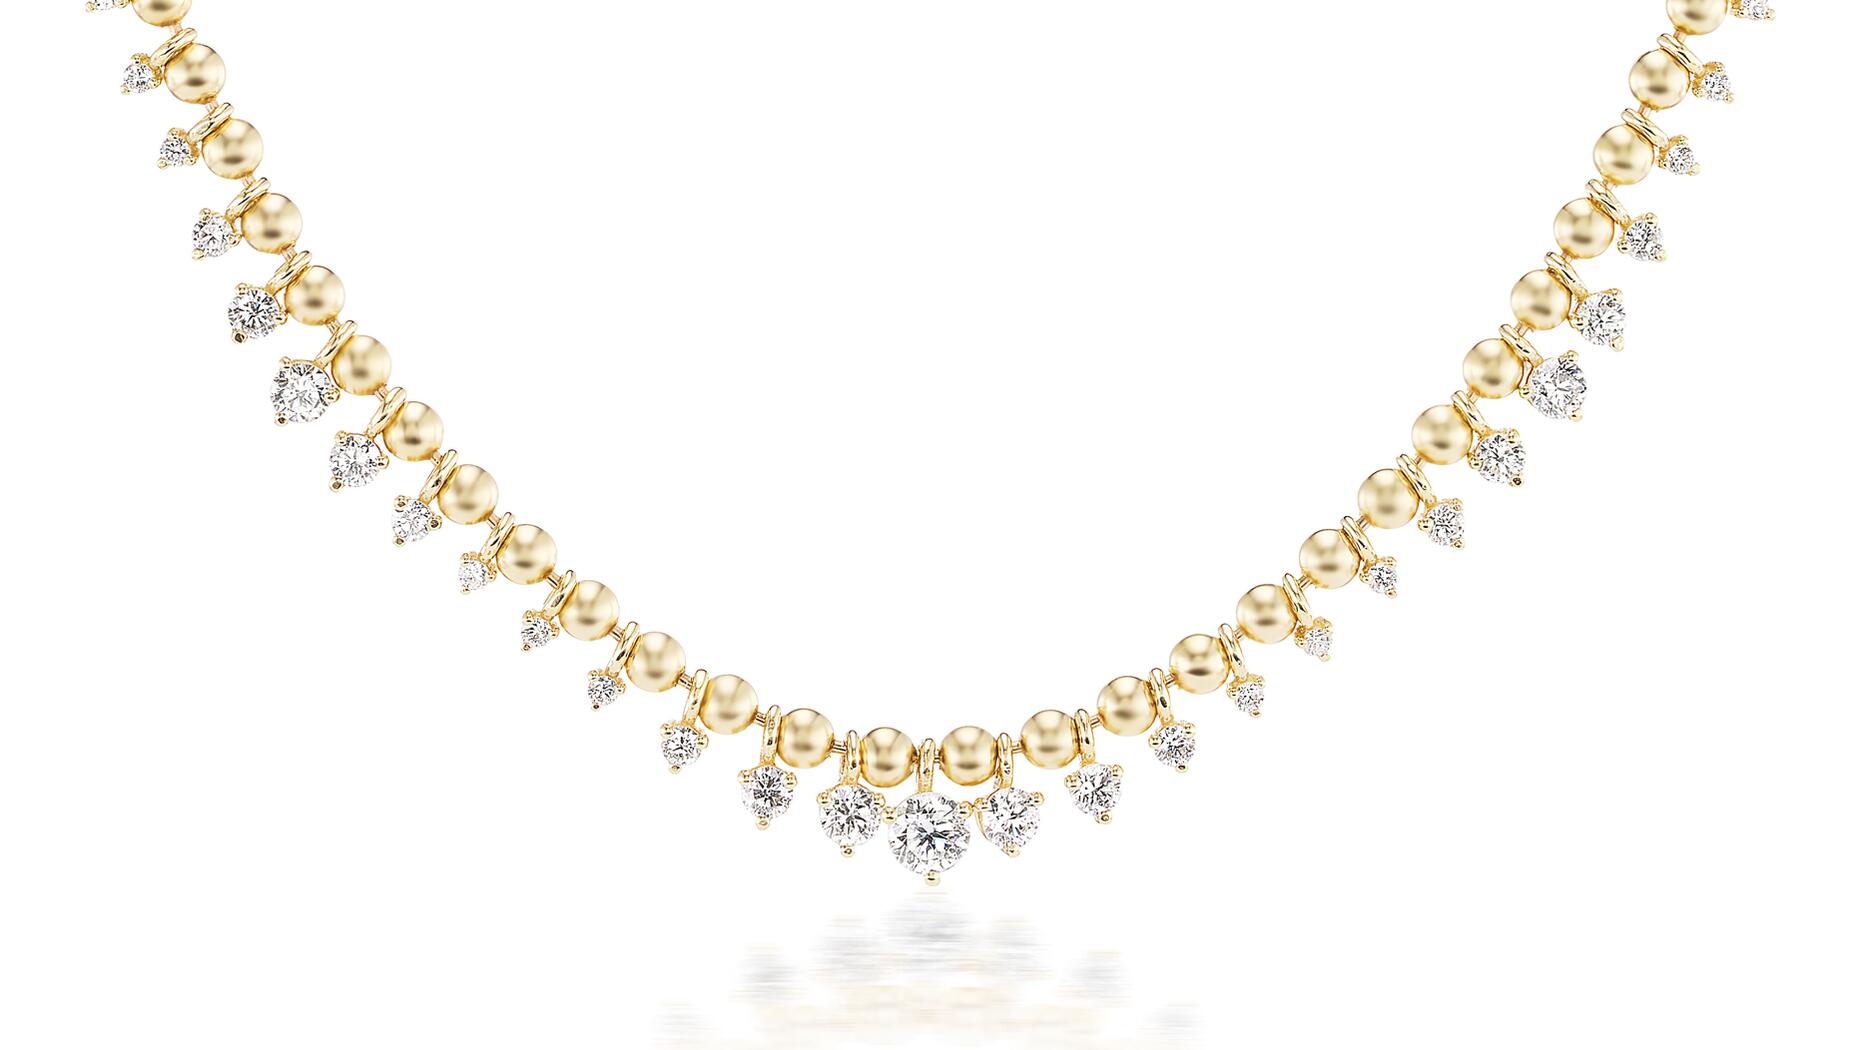 Vice Versa gold and diamond ball chain tennis necklace  